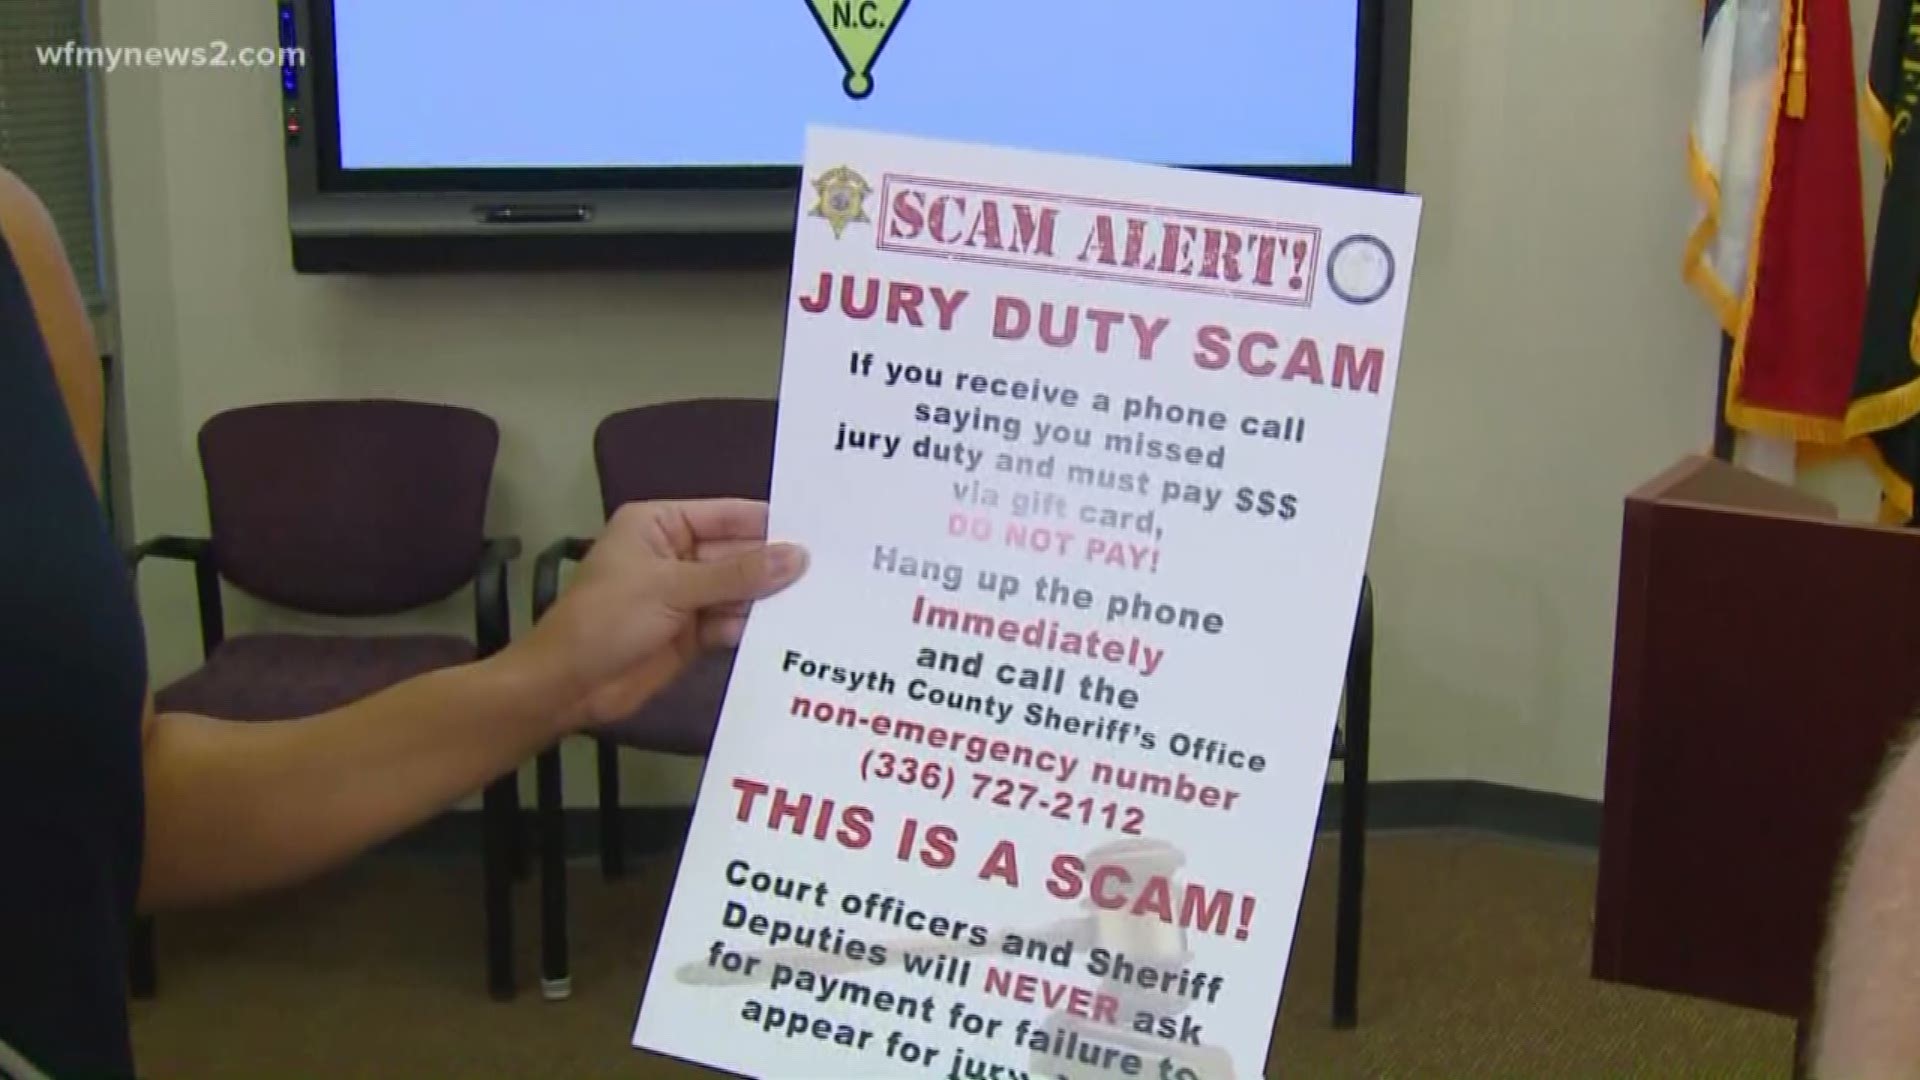 Forsyth County Sheriff’s Office is warning the public about jury service scams.